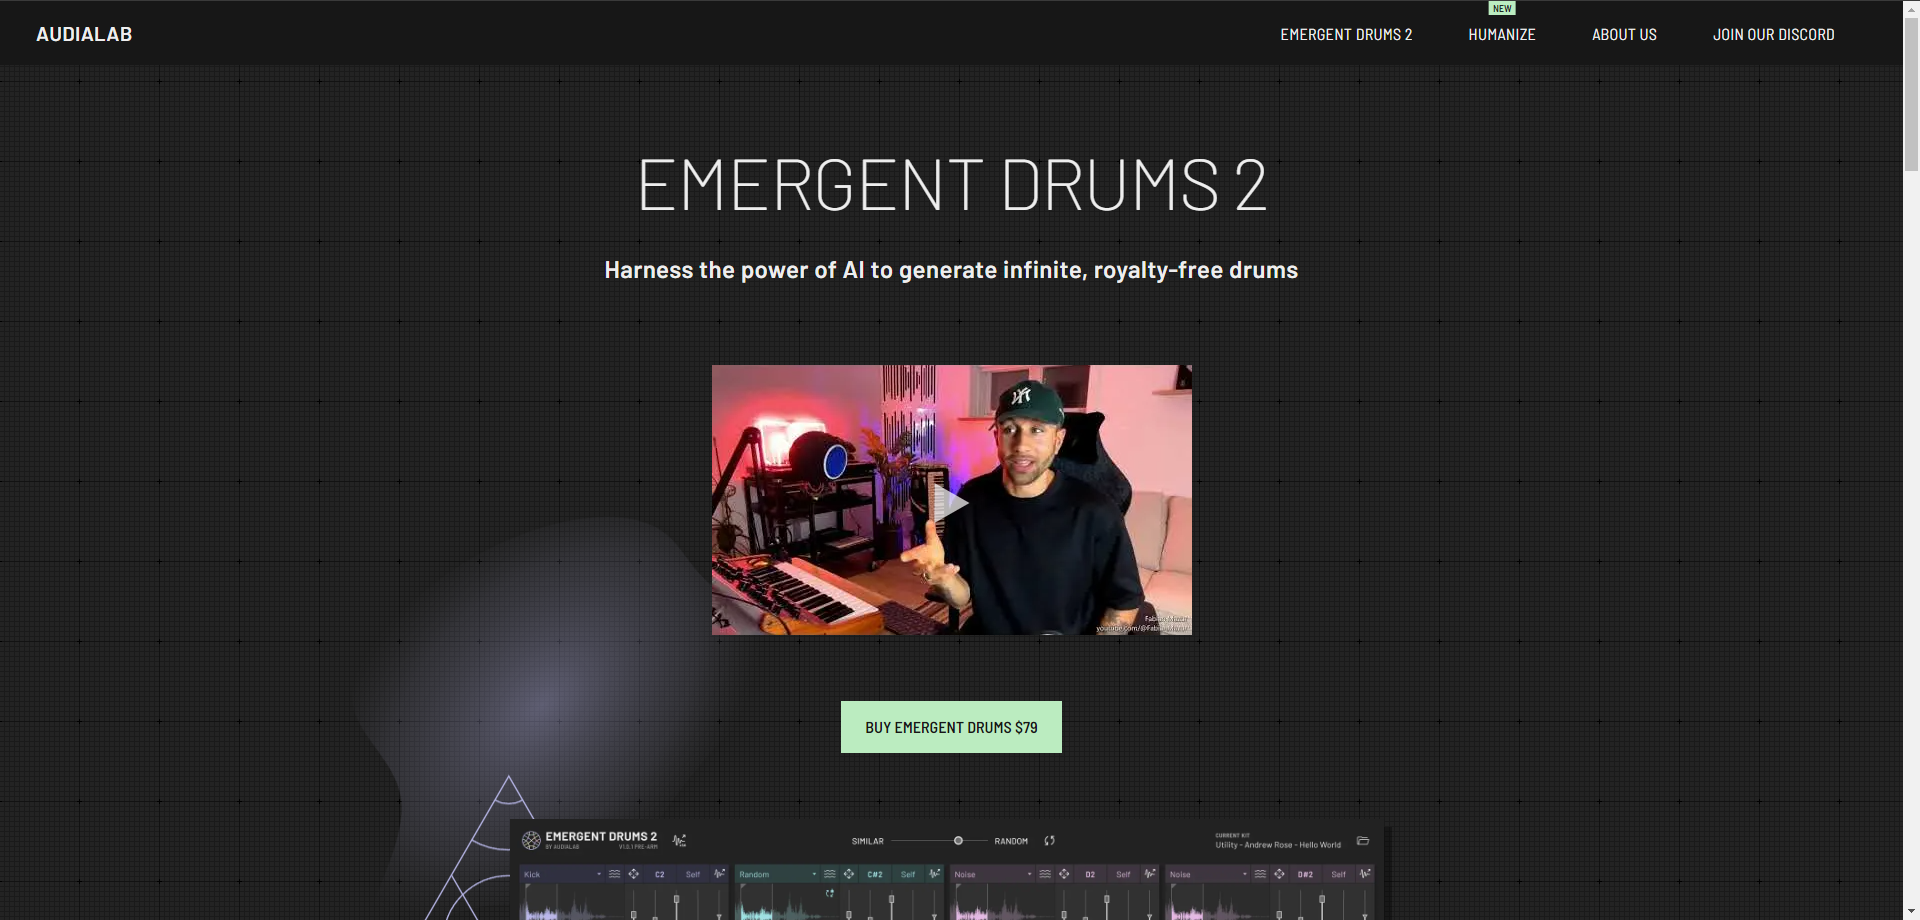 Audialab's Emergent Drums